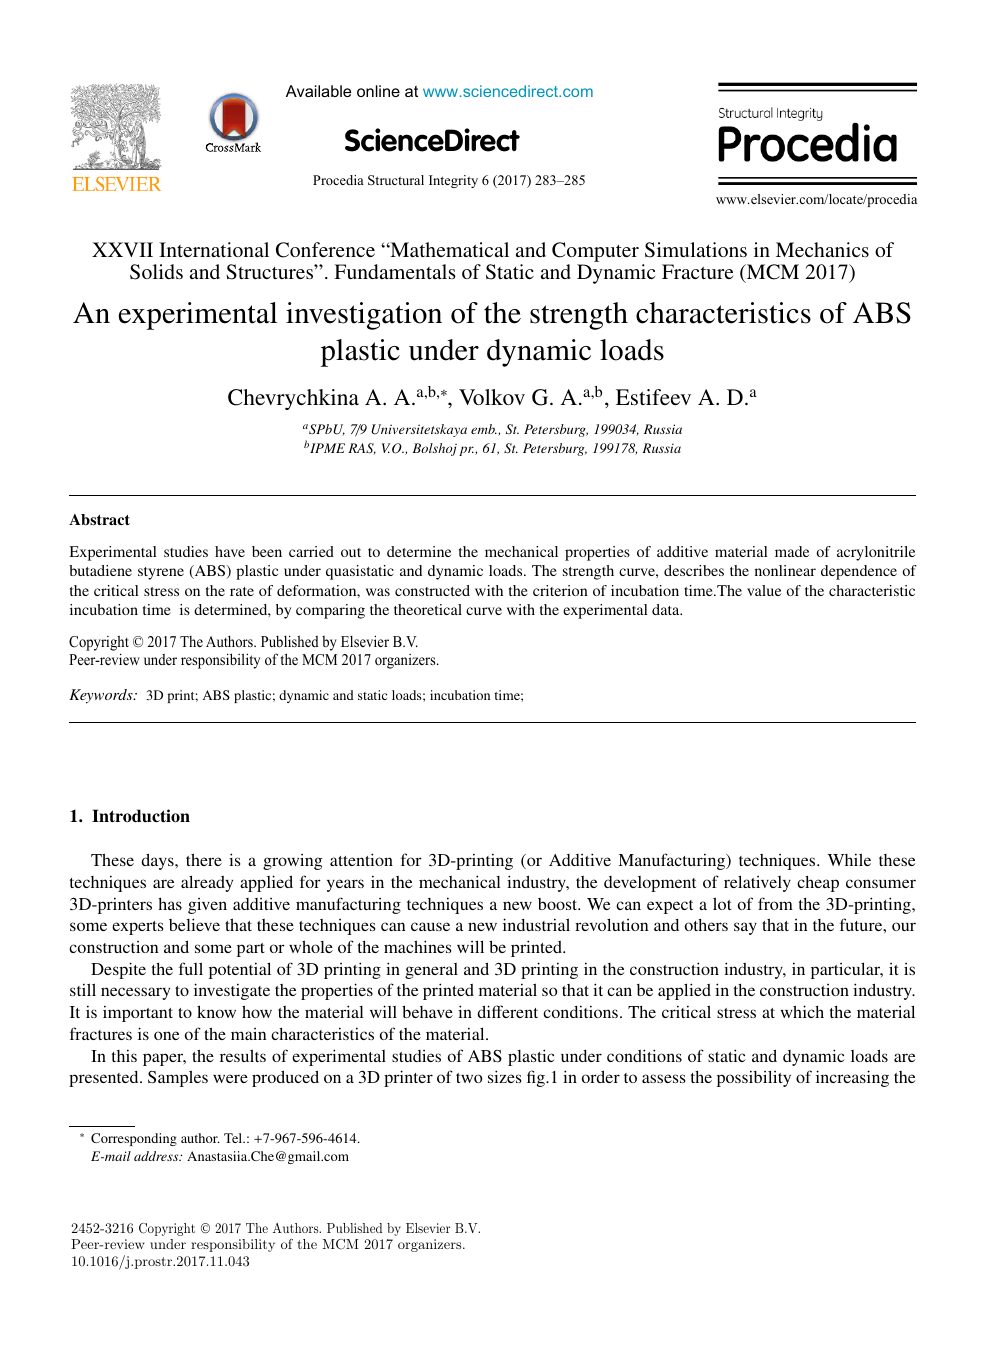 An Experimental Investigation Of The Strength Characteristics Of Abs Plastic Under Dynamic Loads Topic Of Research Paper In Materials Engineering Download Scholarly Article Pdf And Read For Free On Cyberleninka Open